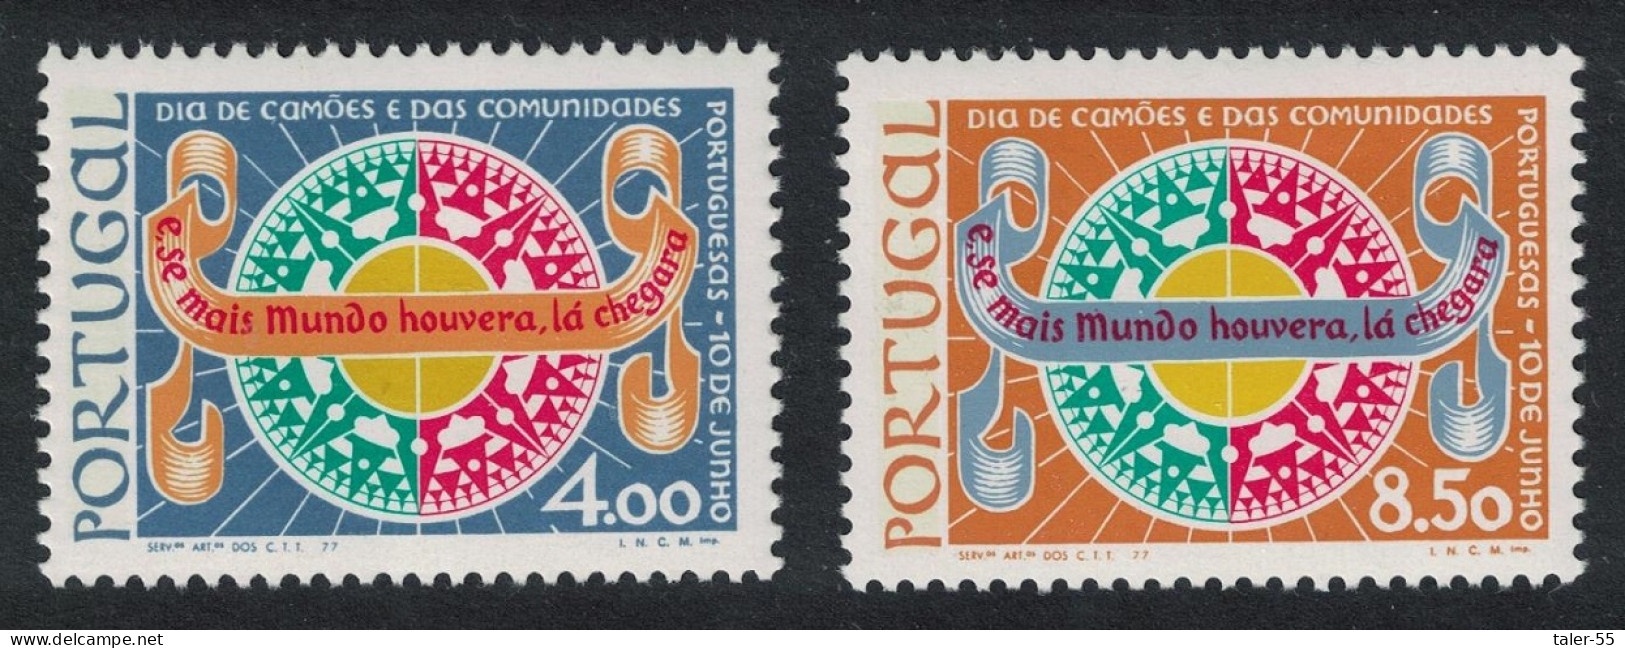 Portugal Camoes Day 2v 1977 MNH SG#1658-1659 - Unused Stamps